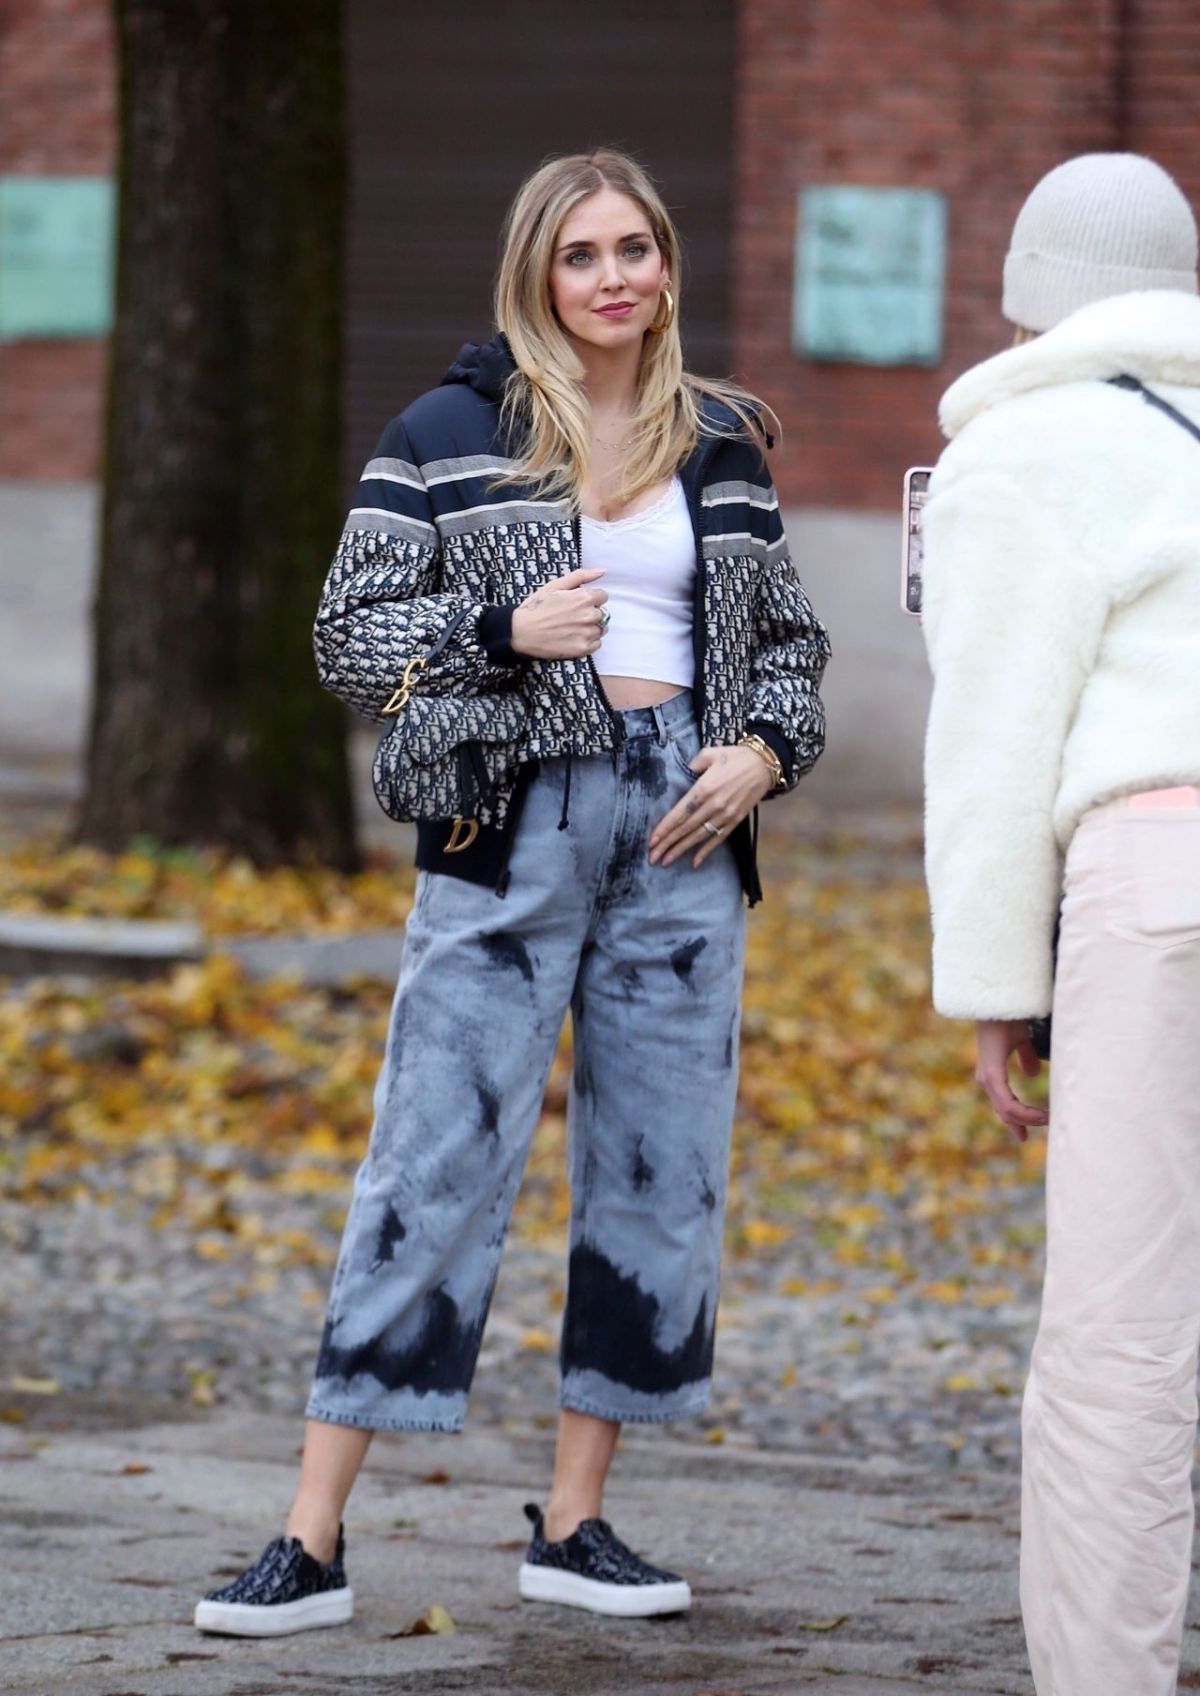 chiara-ferragni-out-and-about-in-milan-12-16-2020-4.jpg